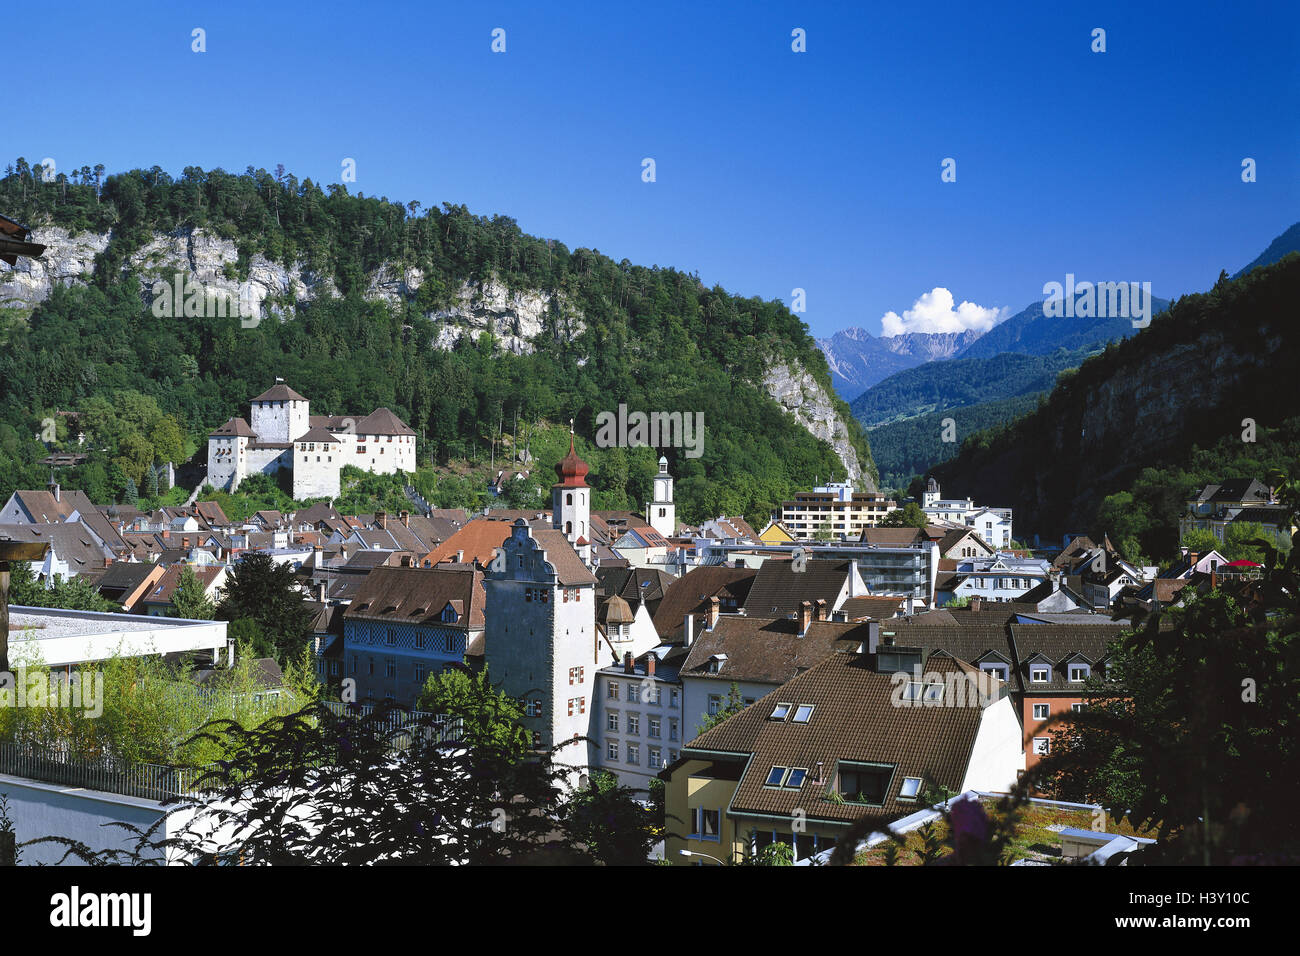 Austria, Vorarlberg, Feldkirch, local view, shadow castle, church, summer, Europe, mountain Arl, tourist resort, local overview, mountain landscape, valley, houses, residential houses, places interest, culture, outside Stock Photo